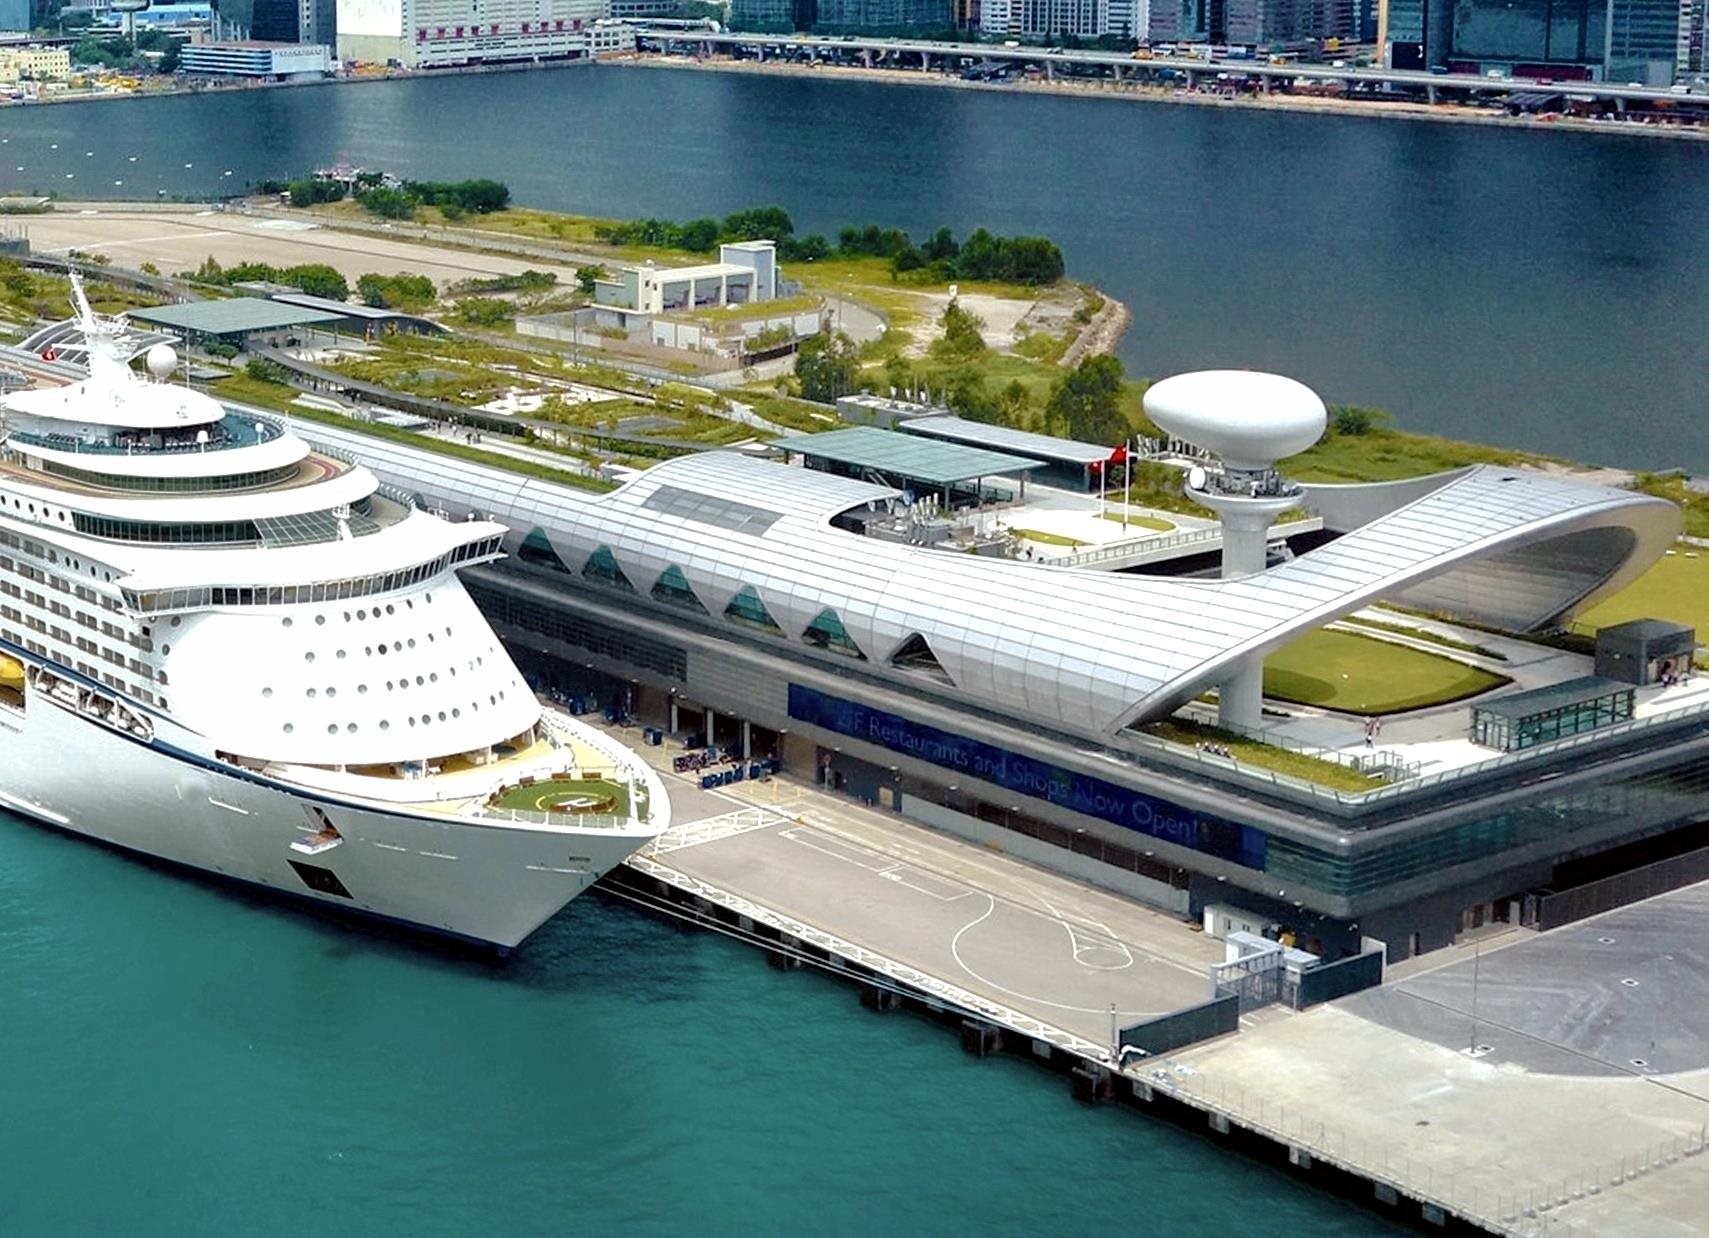 Operation and Maintenance of Electrical and Mechanical Systems at Kai Tak Cruise Terminal, Hong Kong